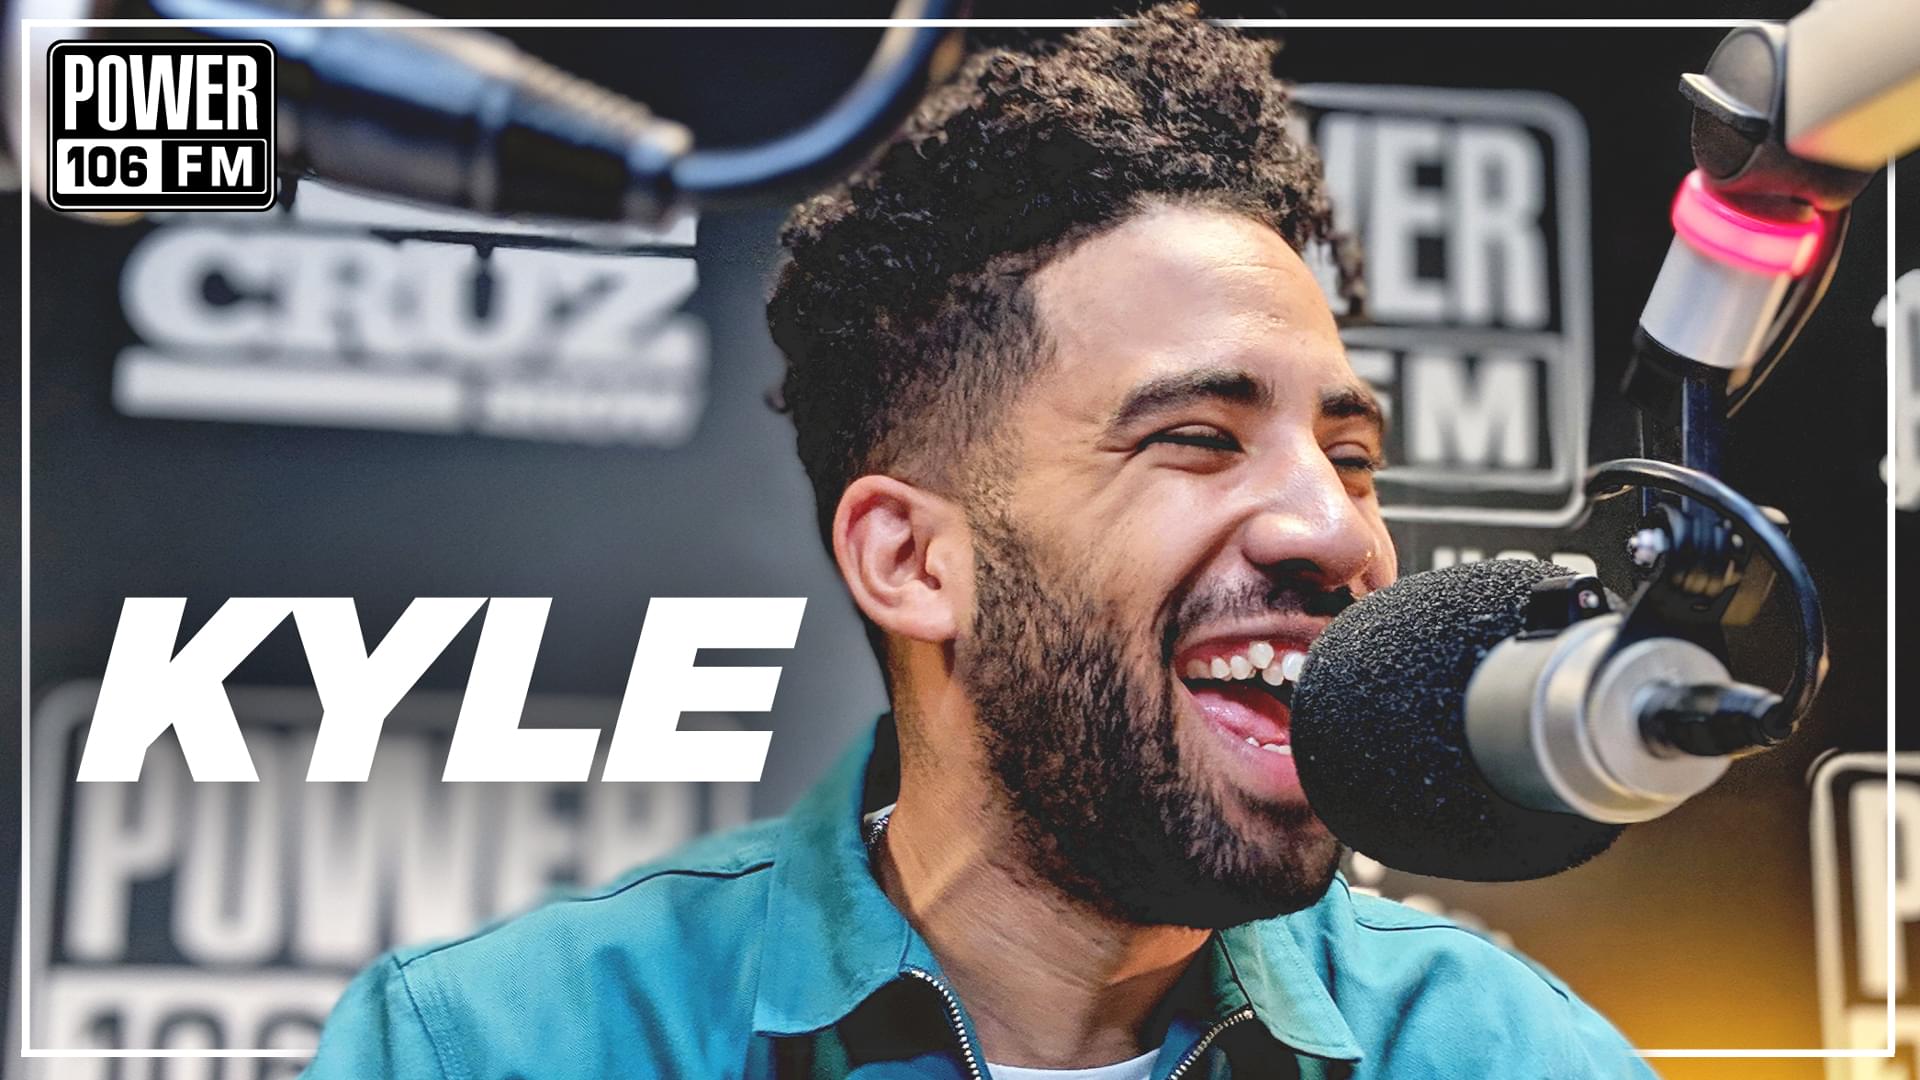 Kyle On “Julie” Collab W/ Lil Yachty, Upcoming World Tour + Confirms “Playinwitme” Remix Ft. Jay Park